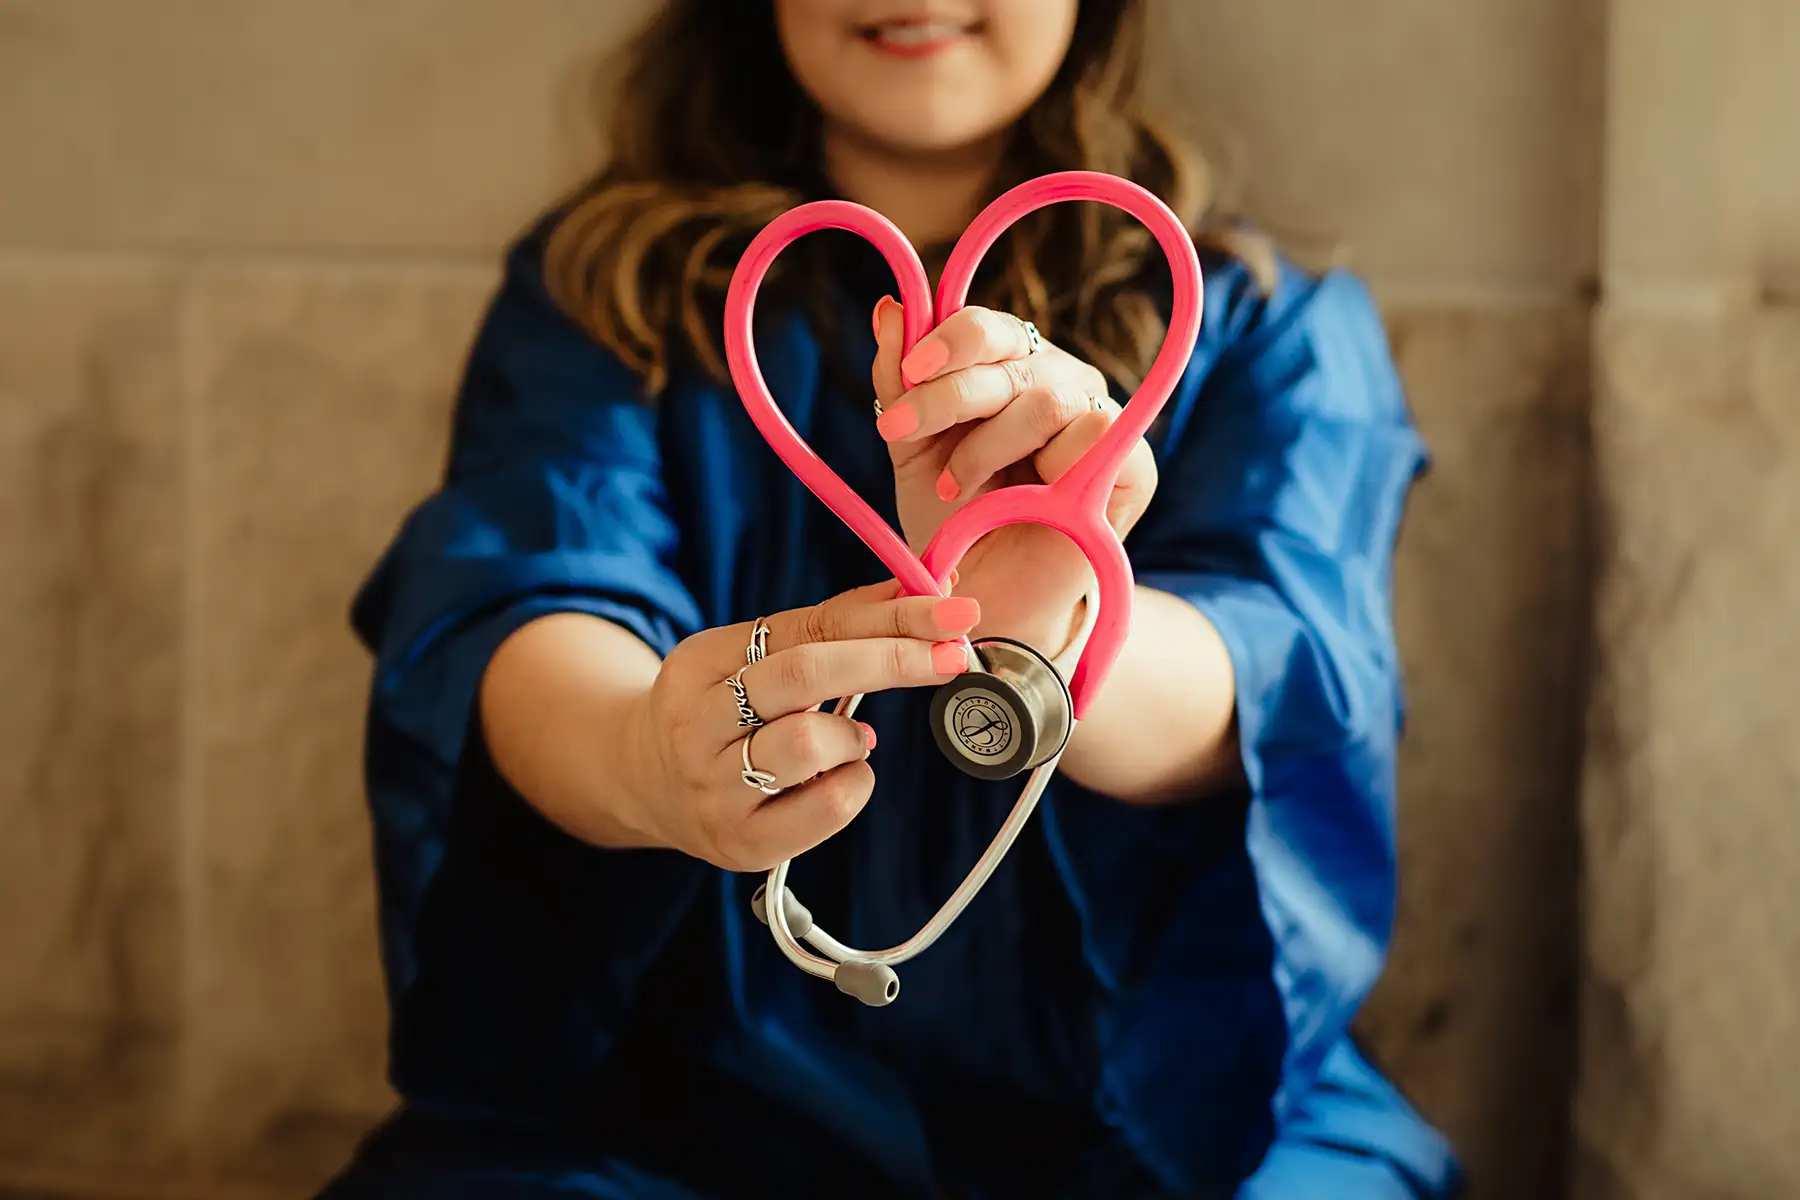 image of woman holding up stethoscope with red tubing in the shape of a heart